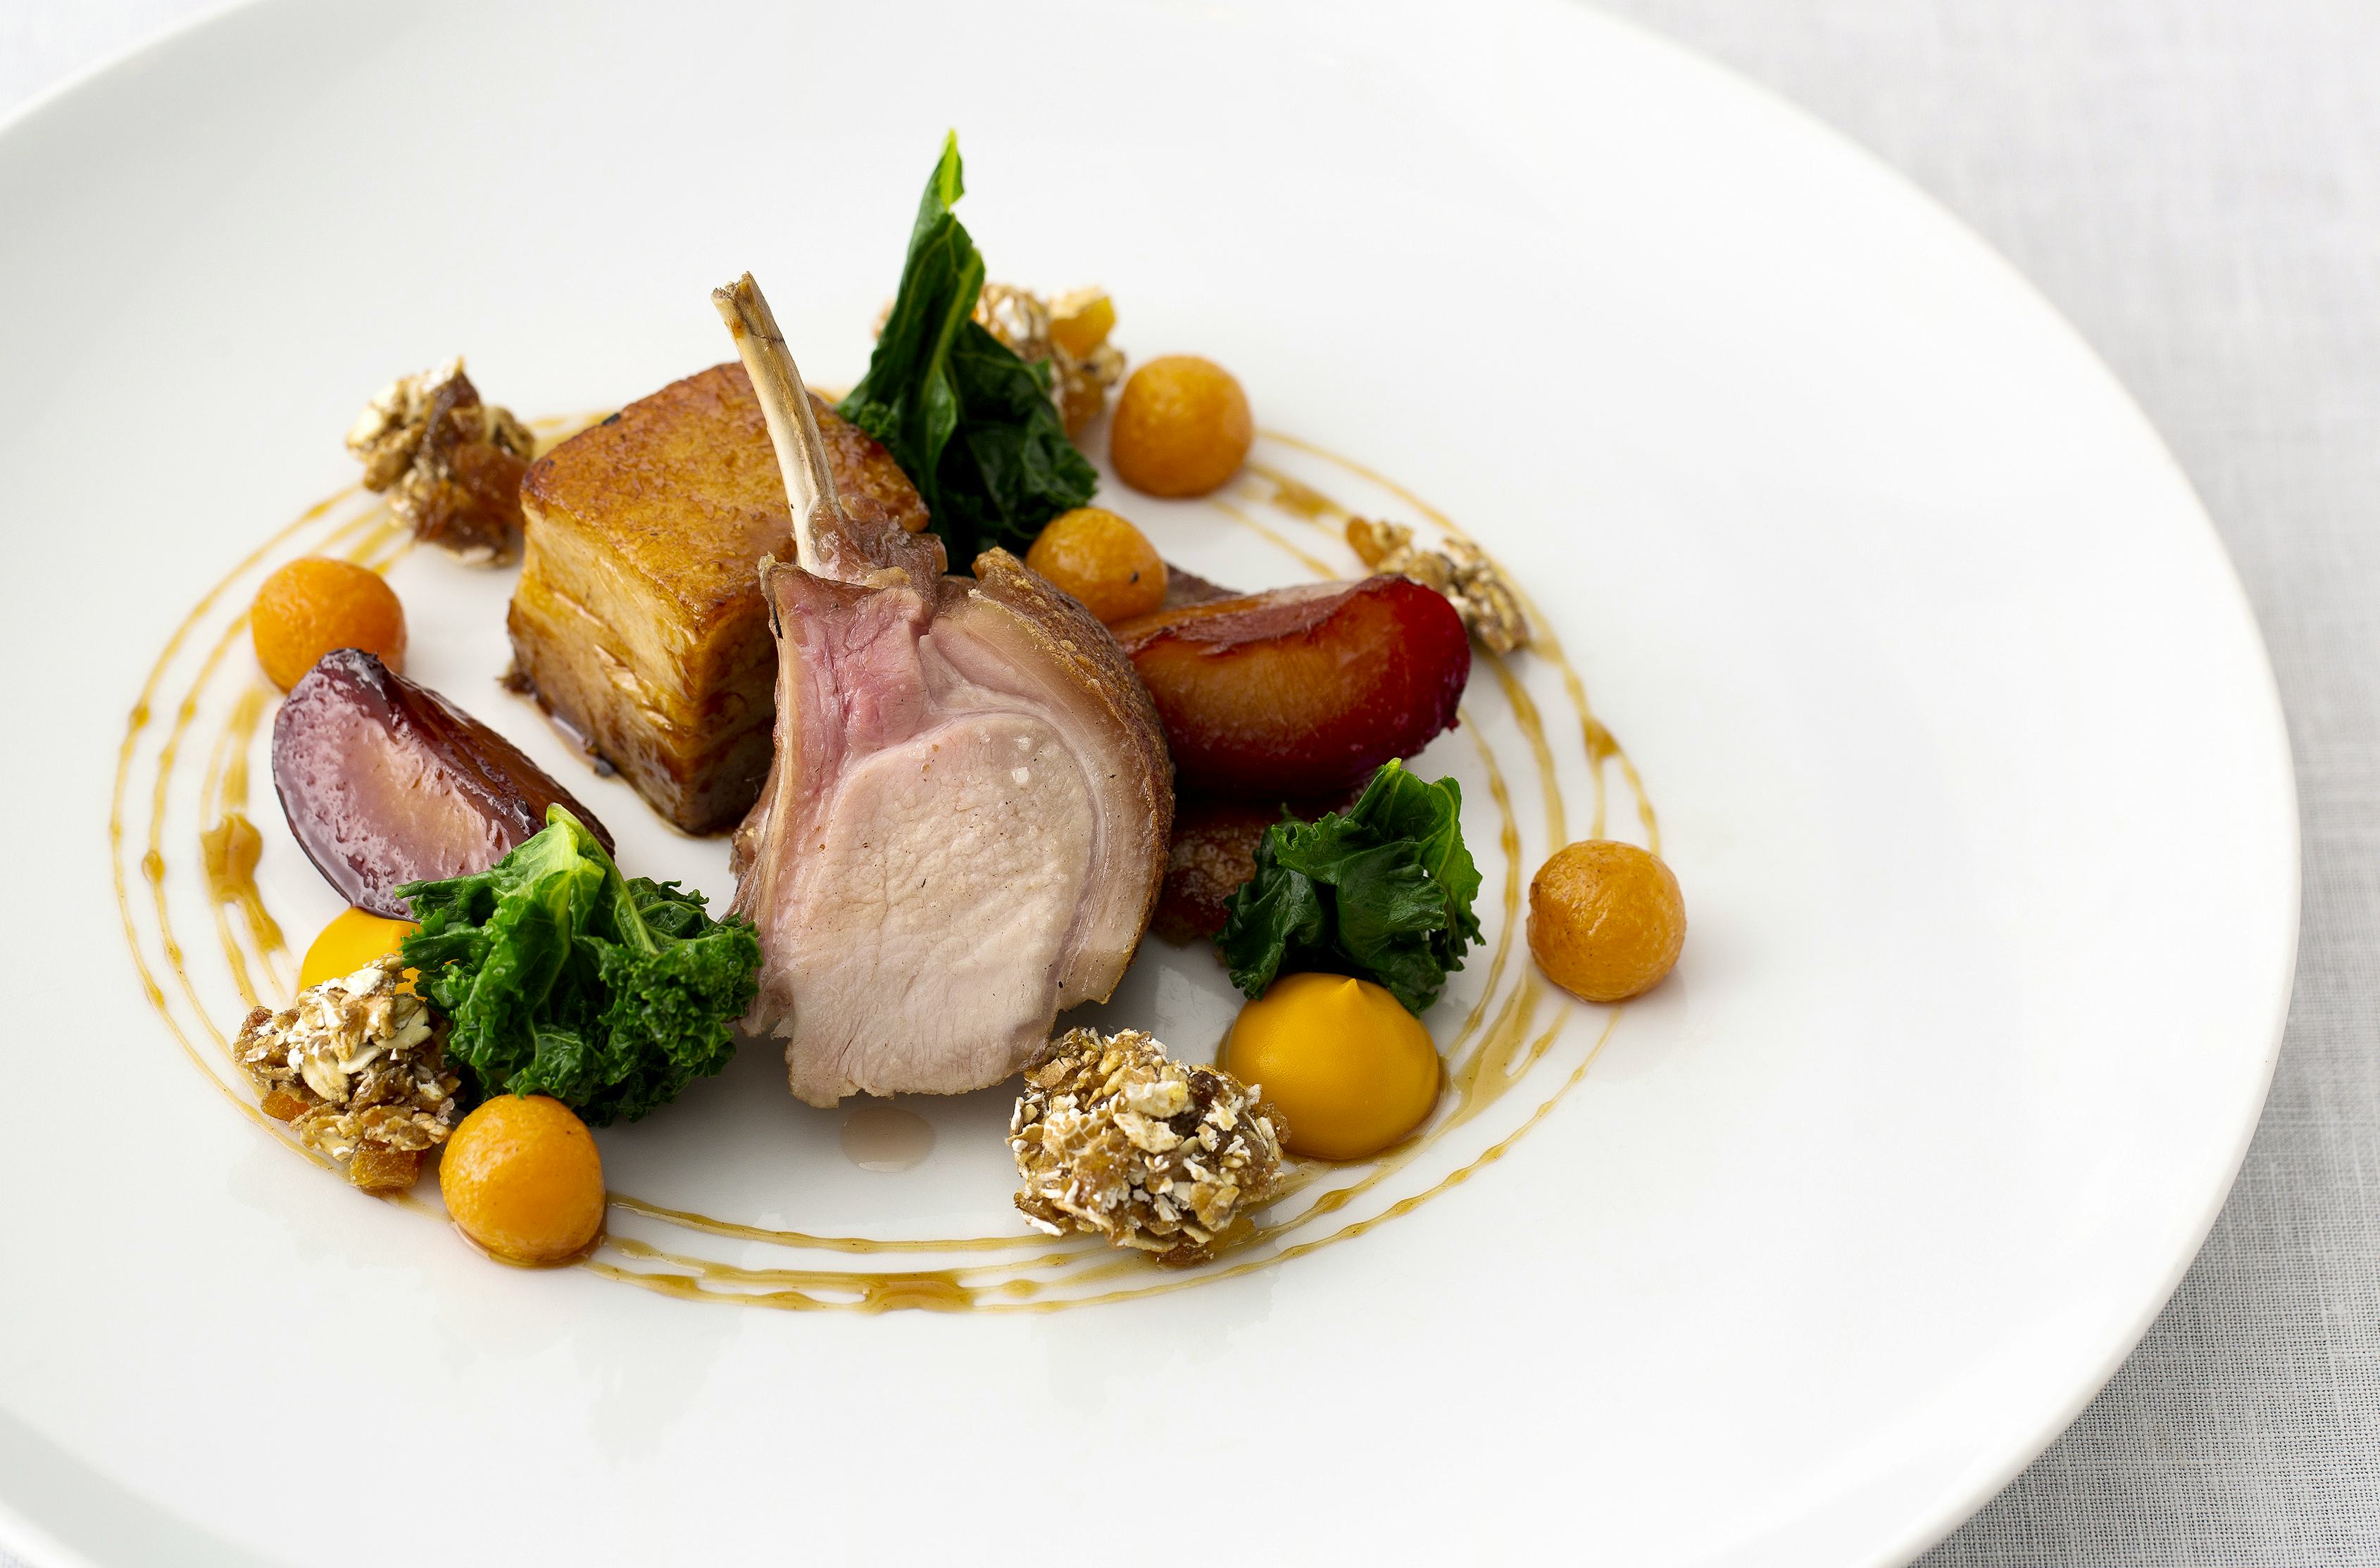 A meat dish at the Pollen Street Social restaurant 